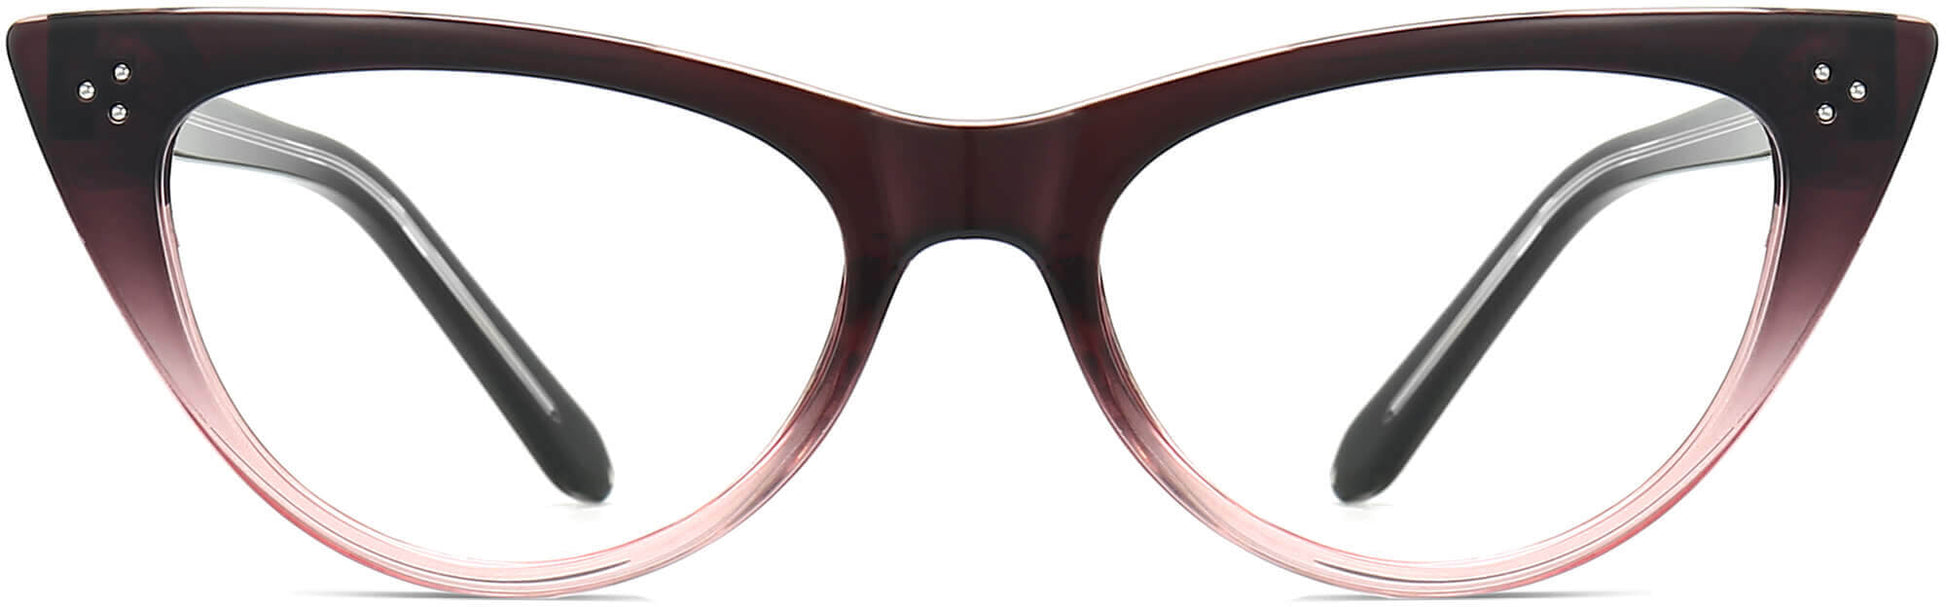 Eden Cateye Pink Eyeglasses from ANRRI, front view